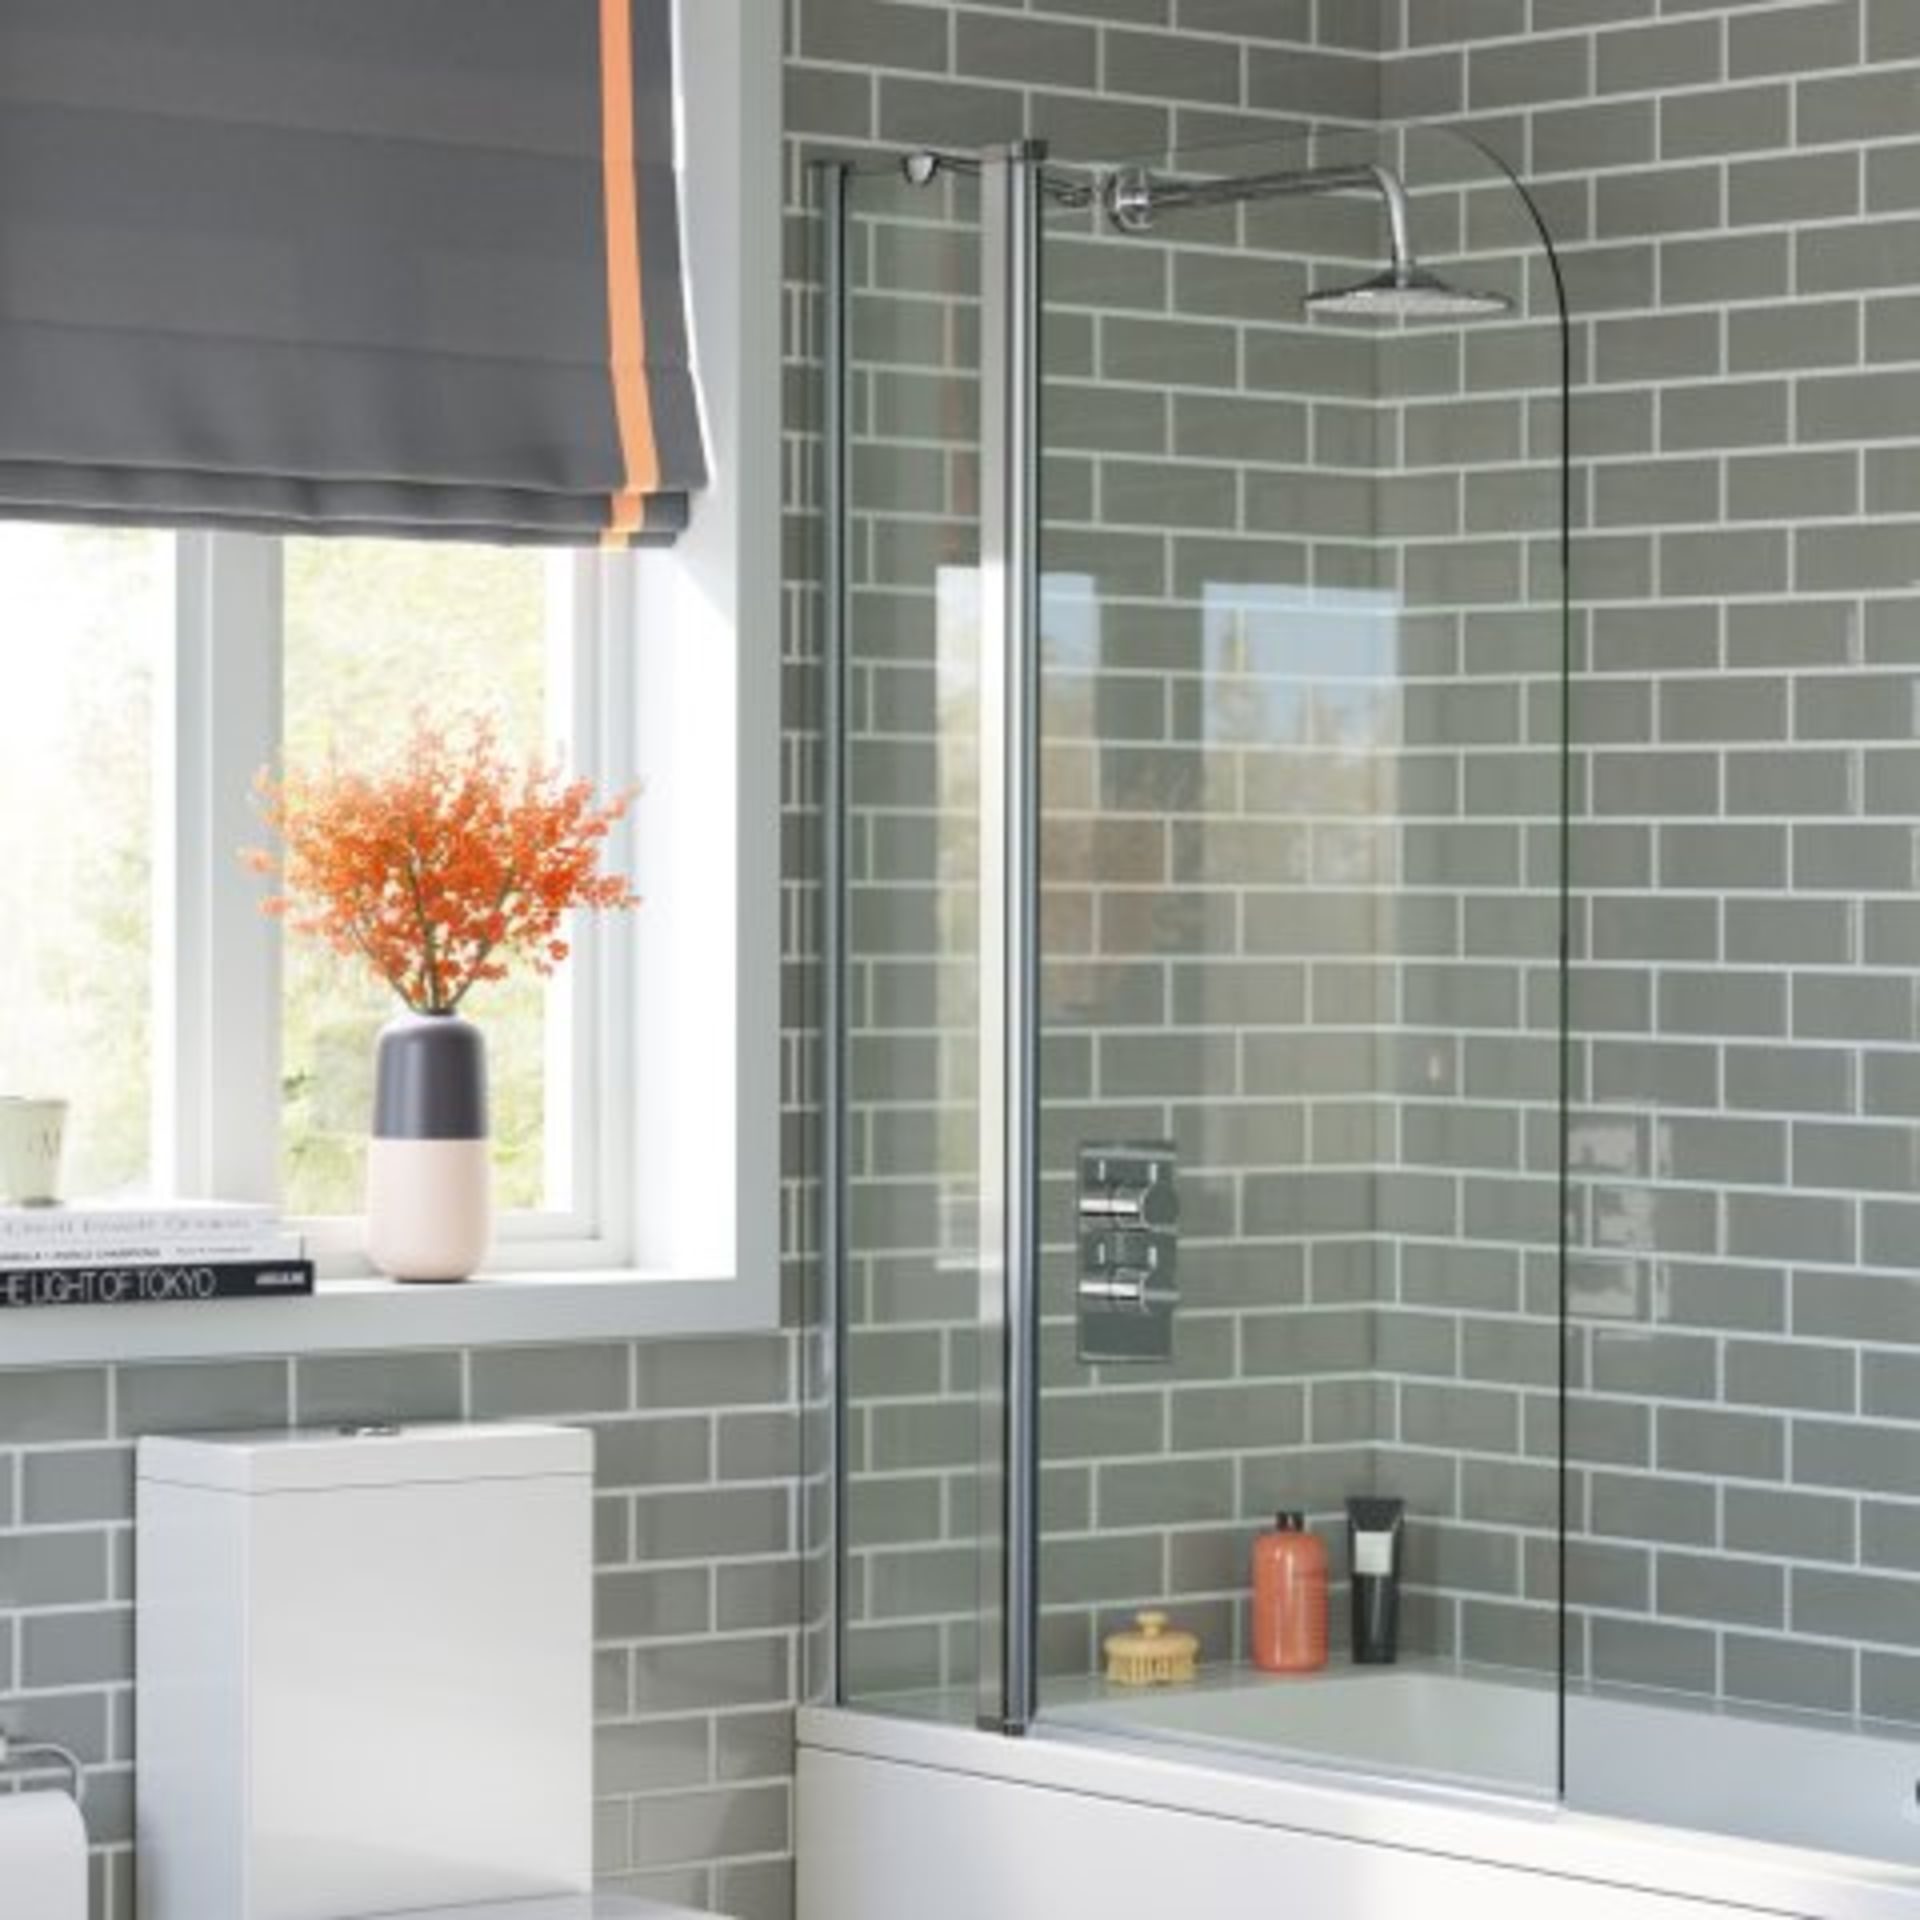 (L93) 1000mm - 6mm - EasyClean Straight Bath Screen RRP £224.99 The clue is in the name: Easy Clean! - Image 6 of 6